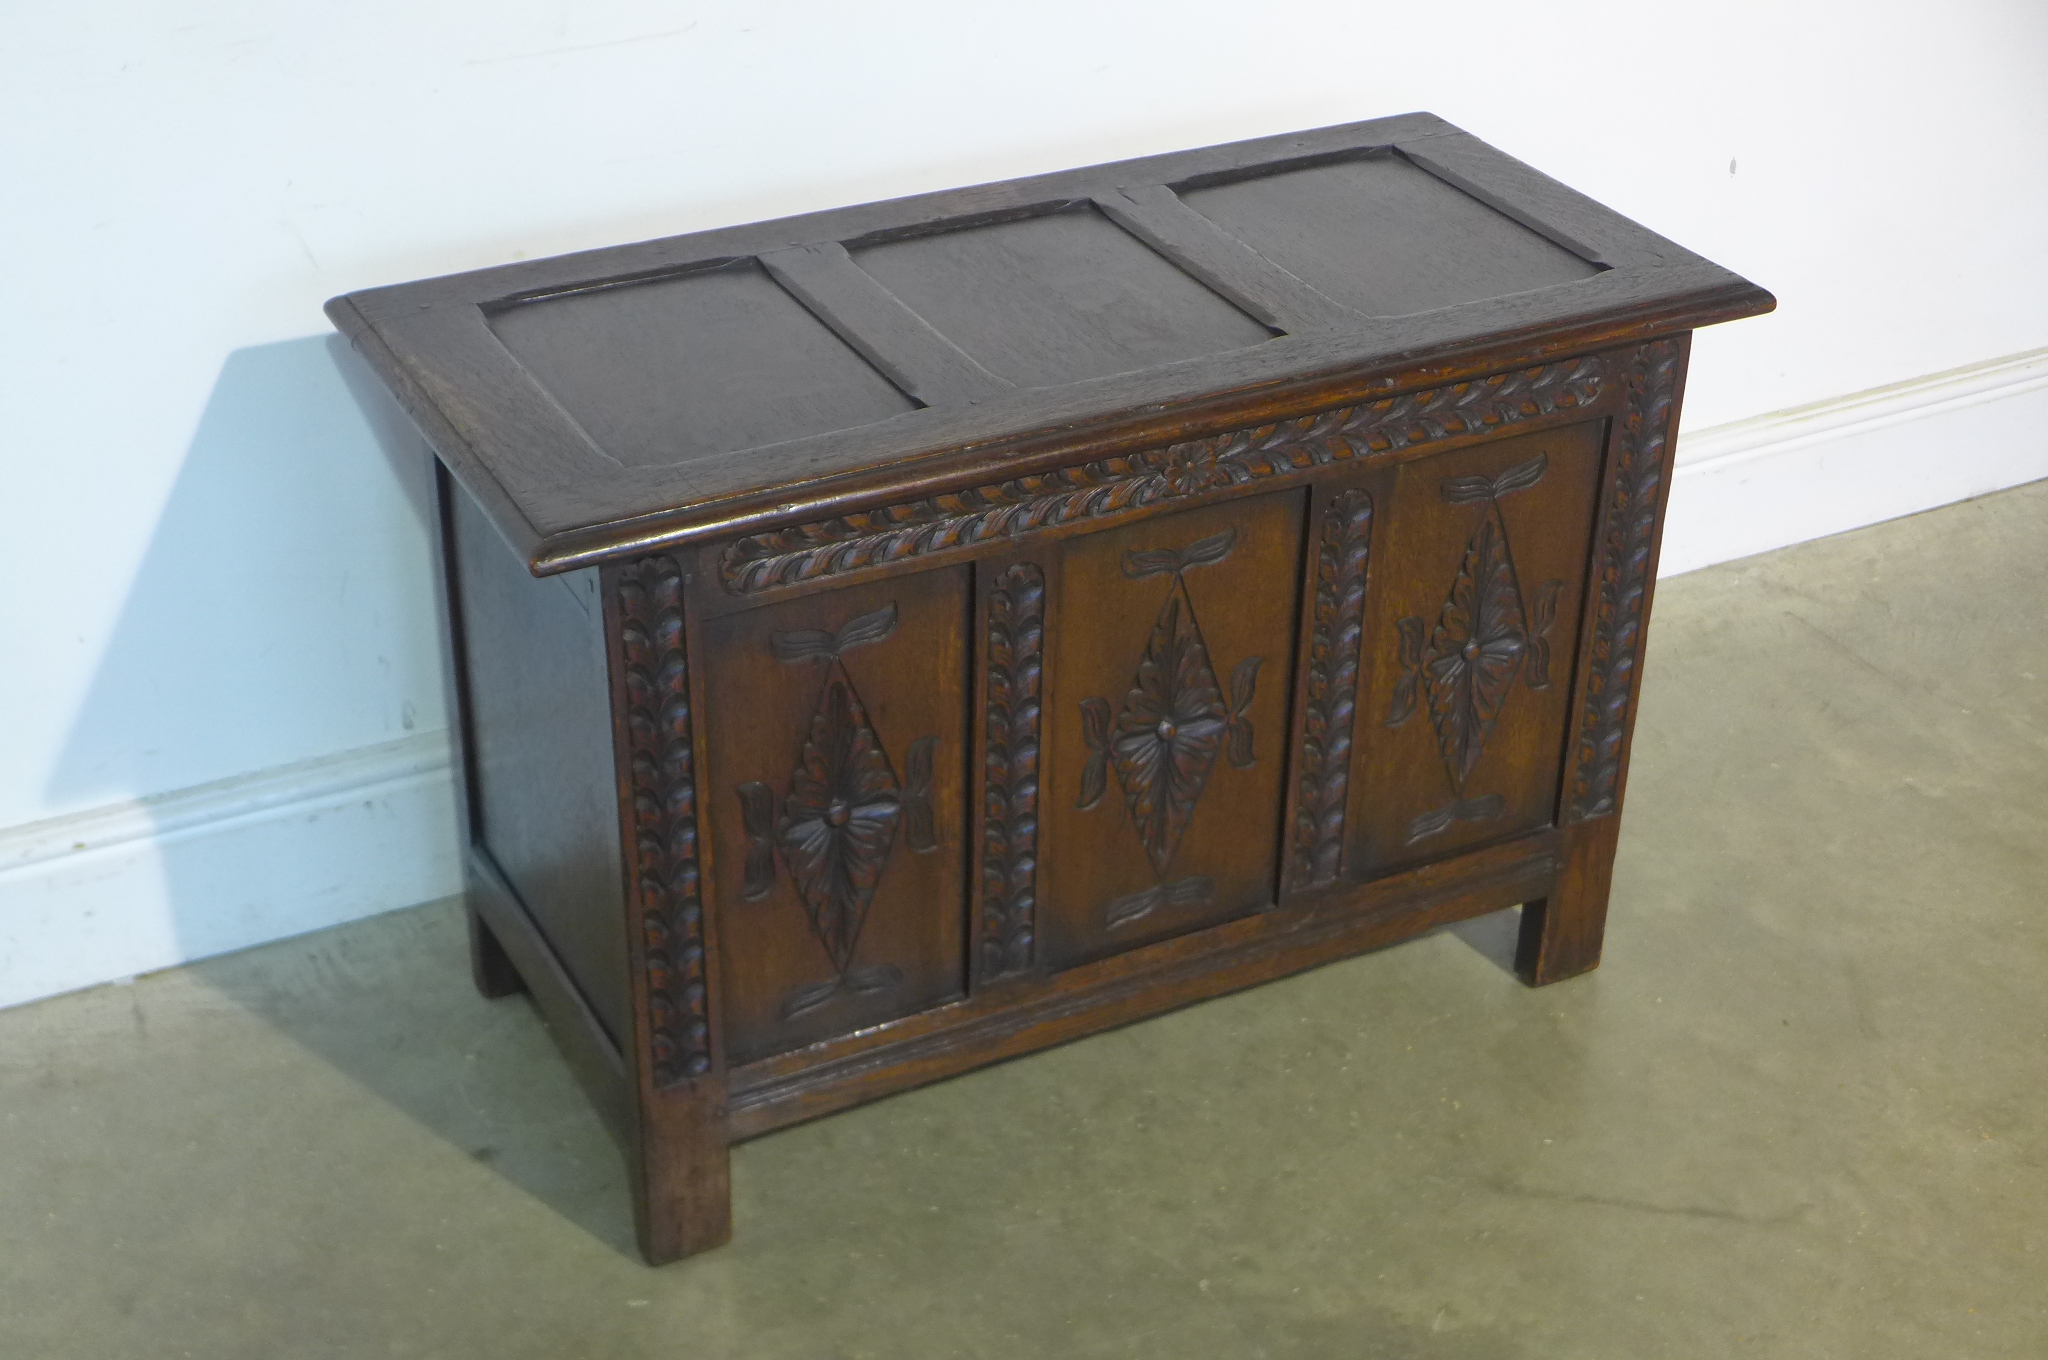 A 17th century style carved oak panelled coffer, 59cm tall x 91cm x 44cm - in good polished